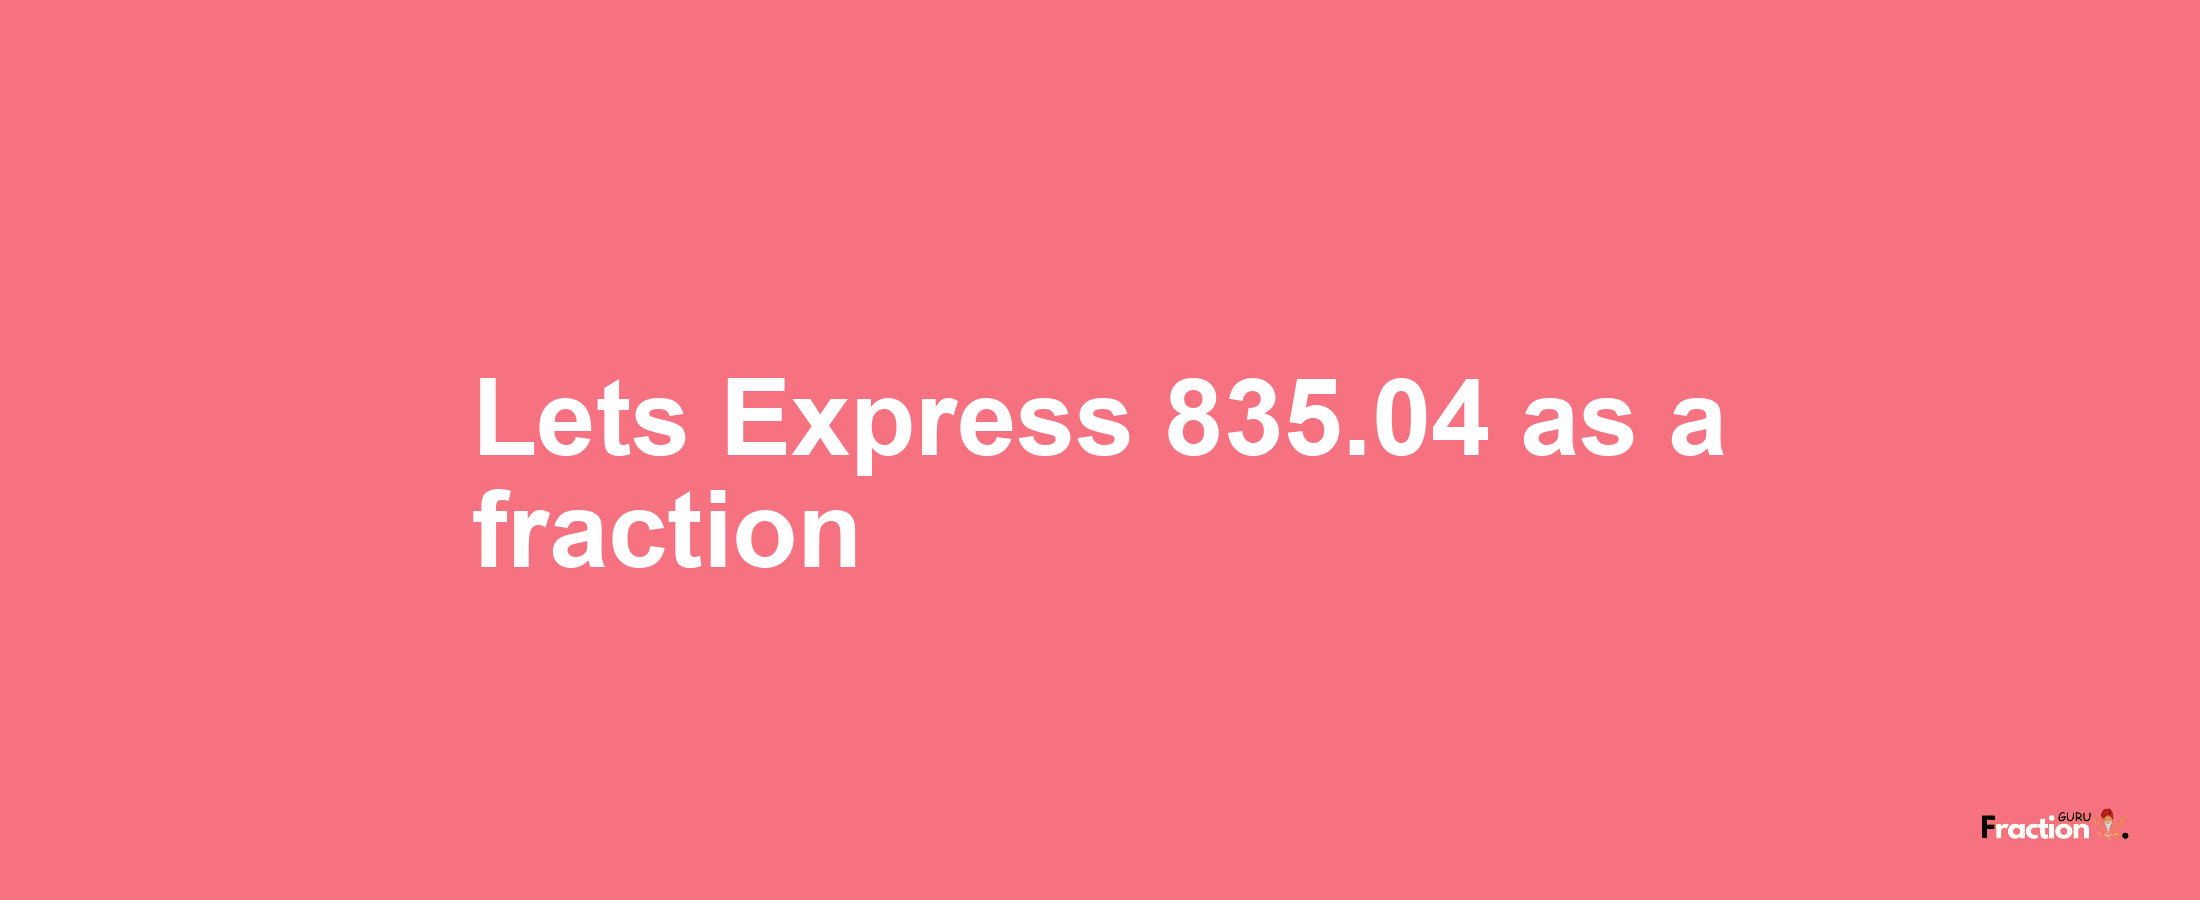 Lets Express 835.04 as afraction